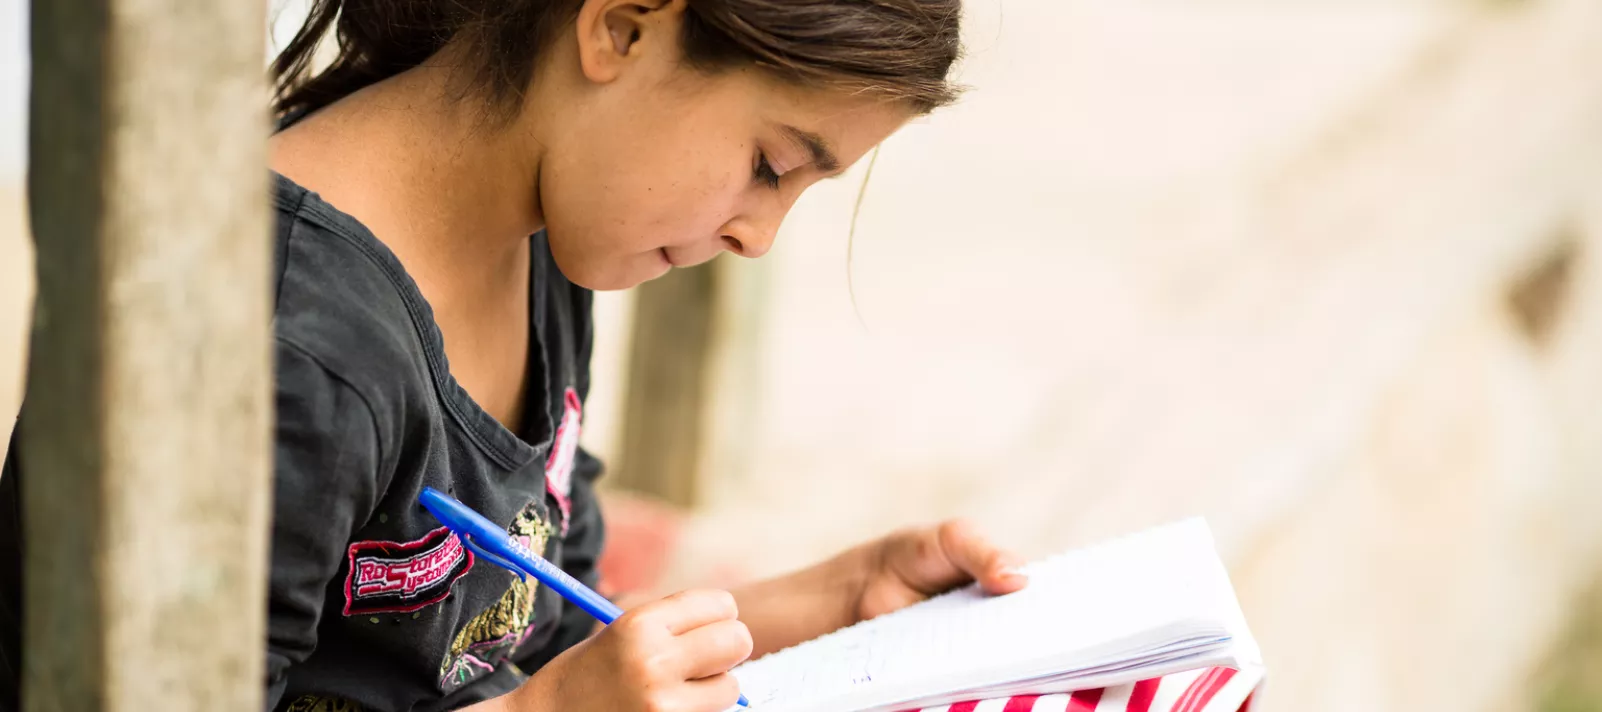 Loredana, 11 years old, sits doing her homework on her porch at her home in Romania.